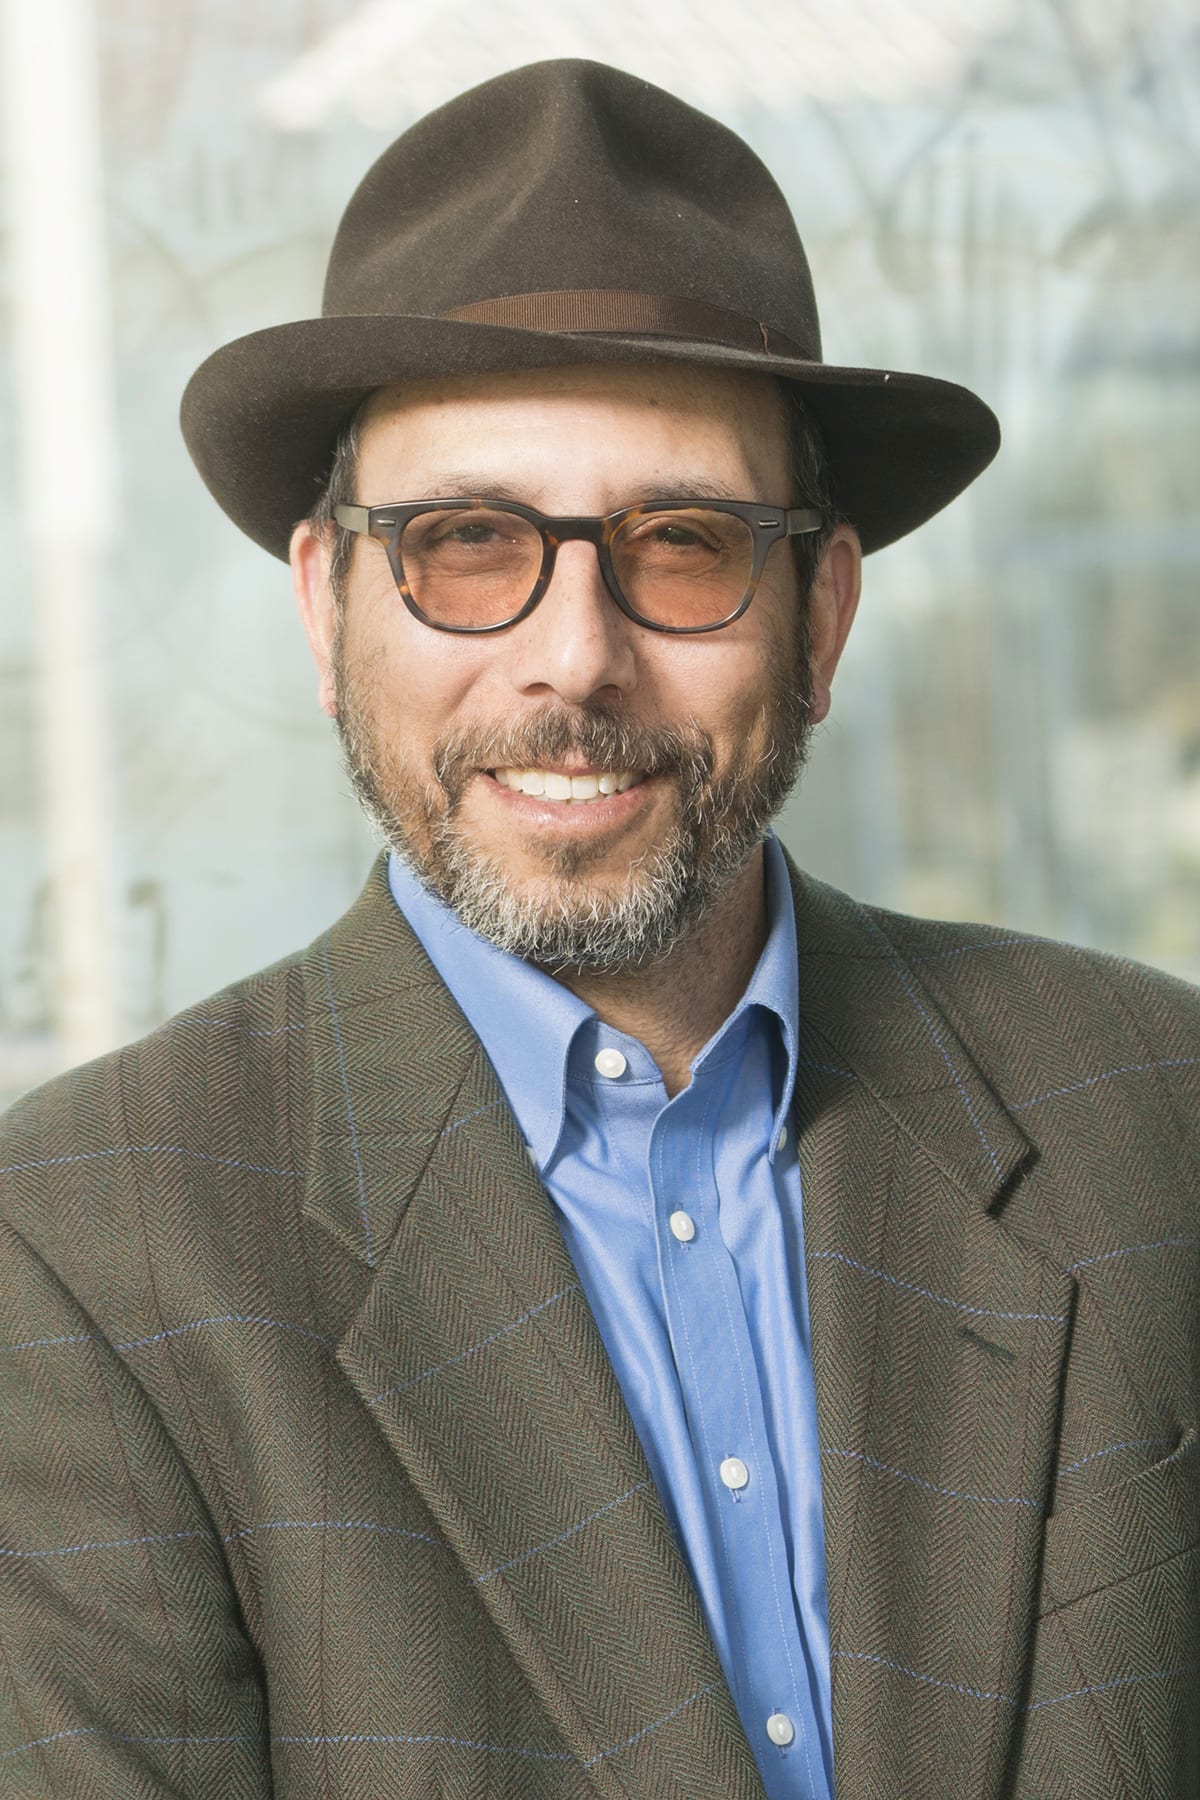 Johnathan Simon smiling in a fedora, brownish-green suit and blue shirt